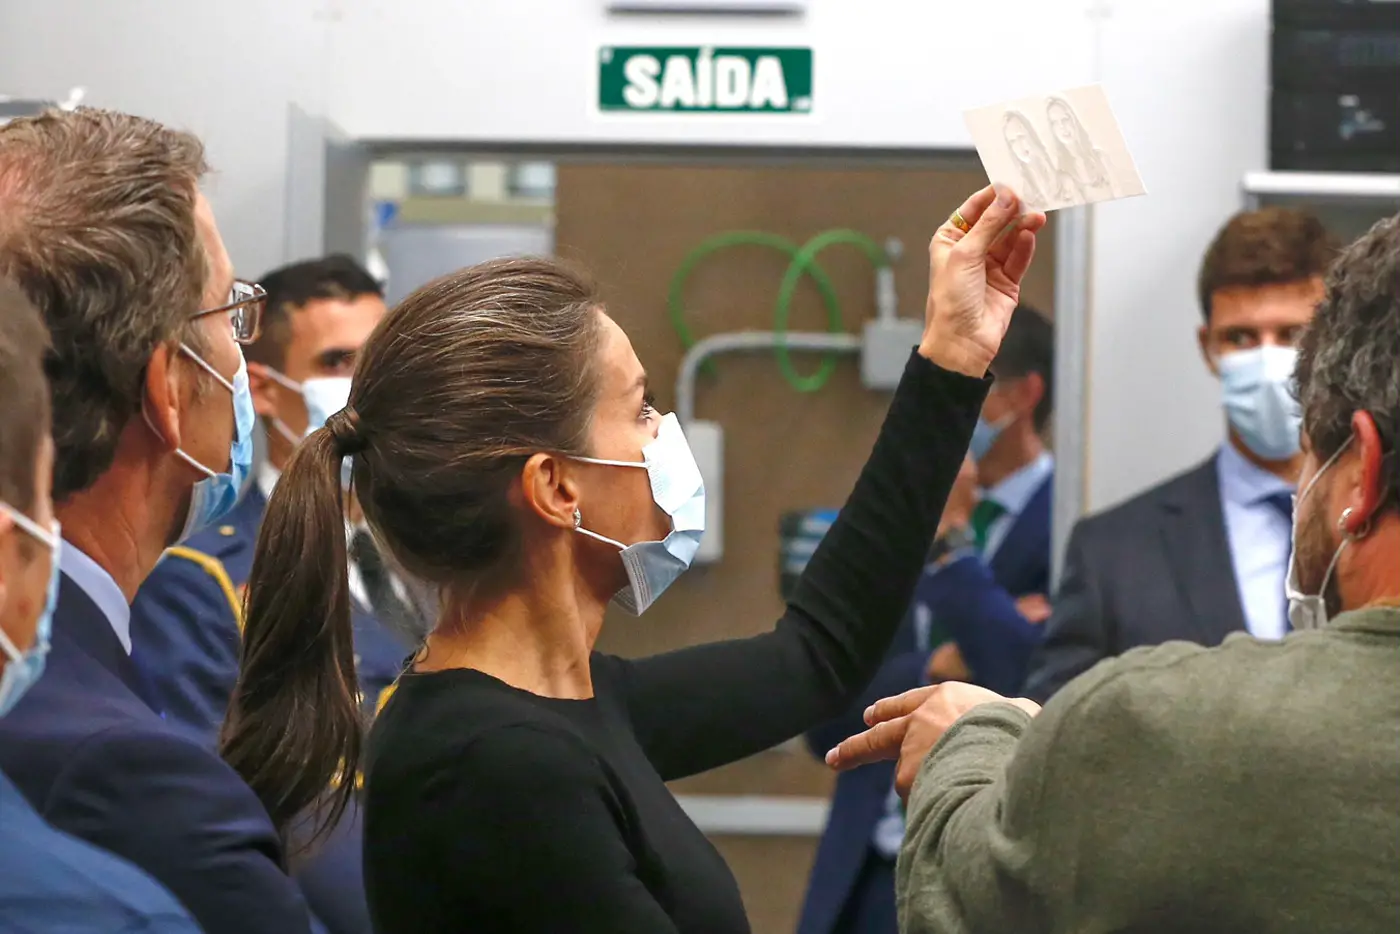 Queen Letizia at the vocational trianing course opening